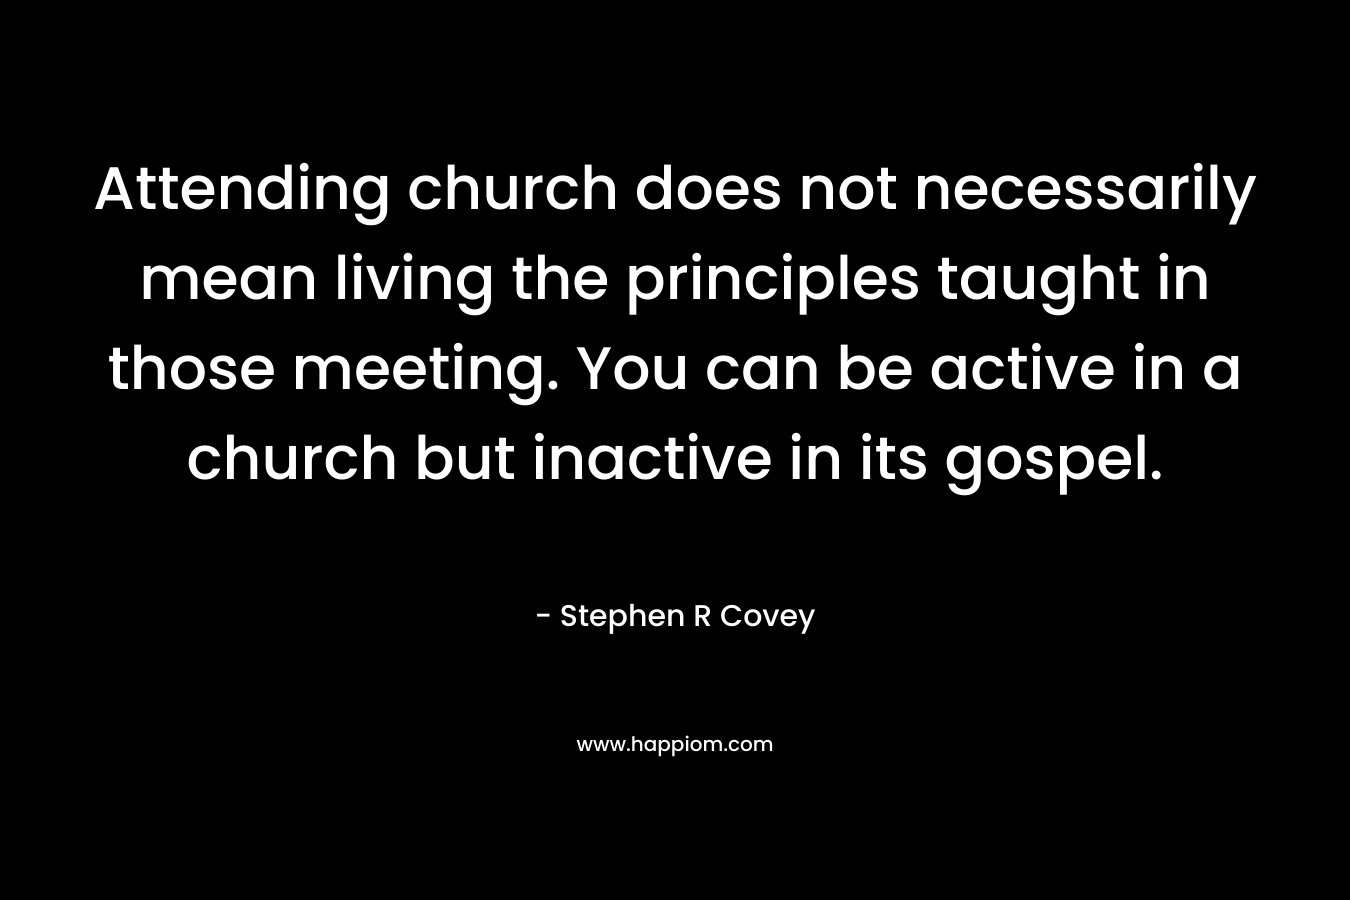 Attending church does not necessarily mean living the principles taught in those meeting. You can be active in a church but inactive in its gospel. – Stephen R Covey